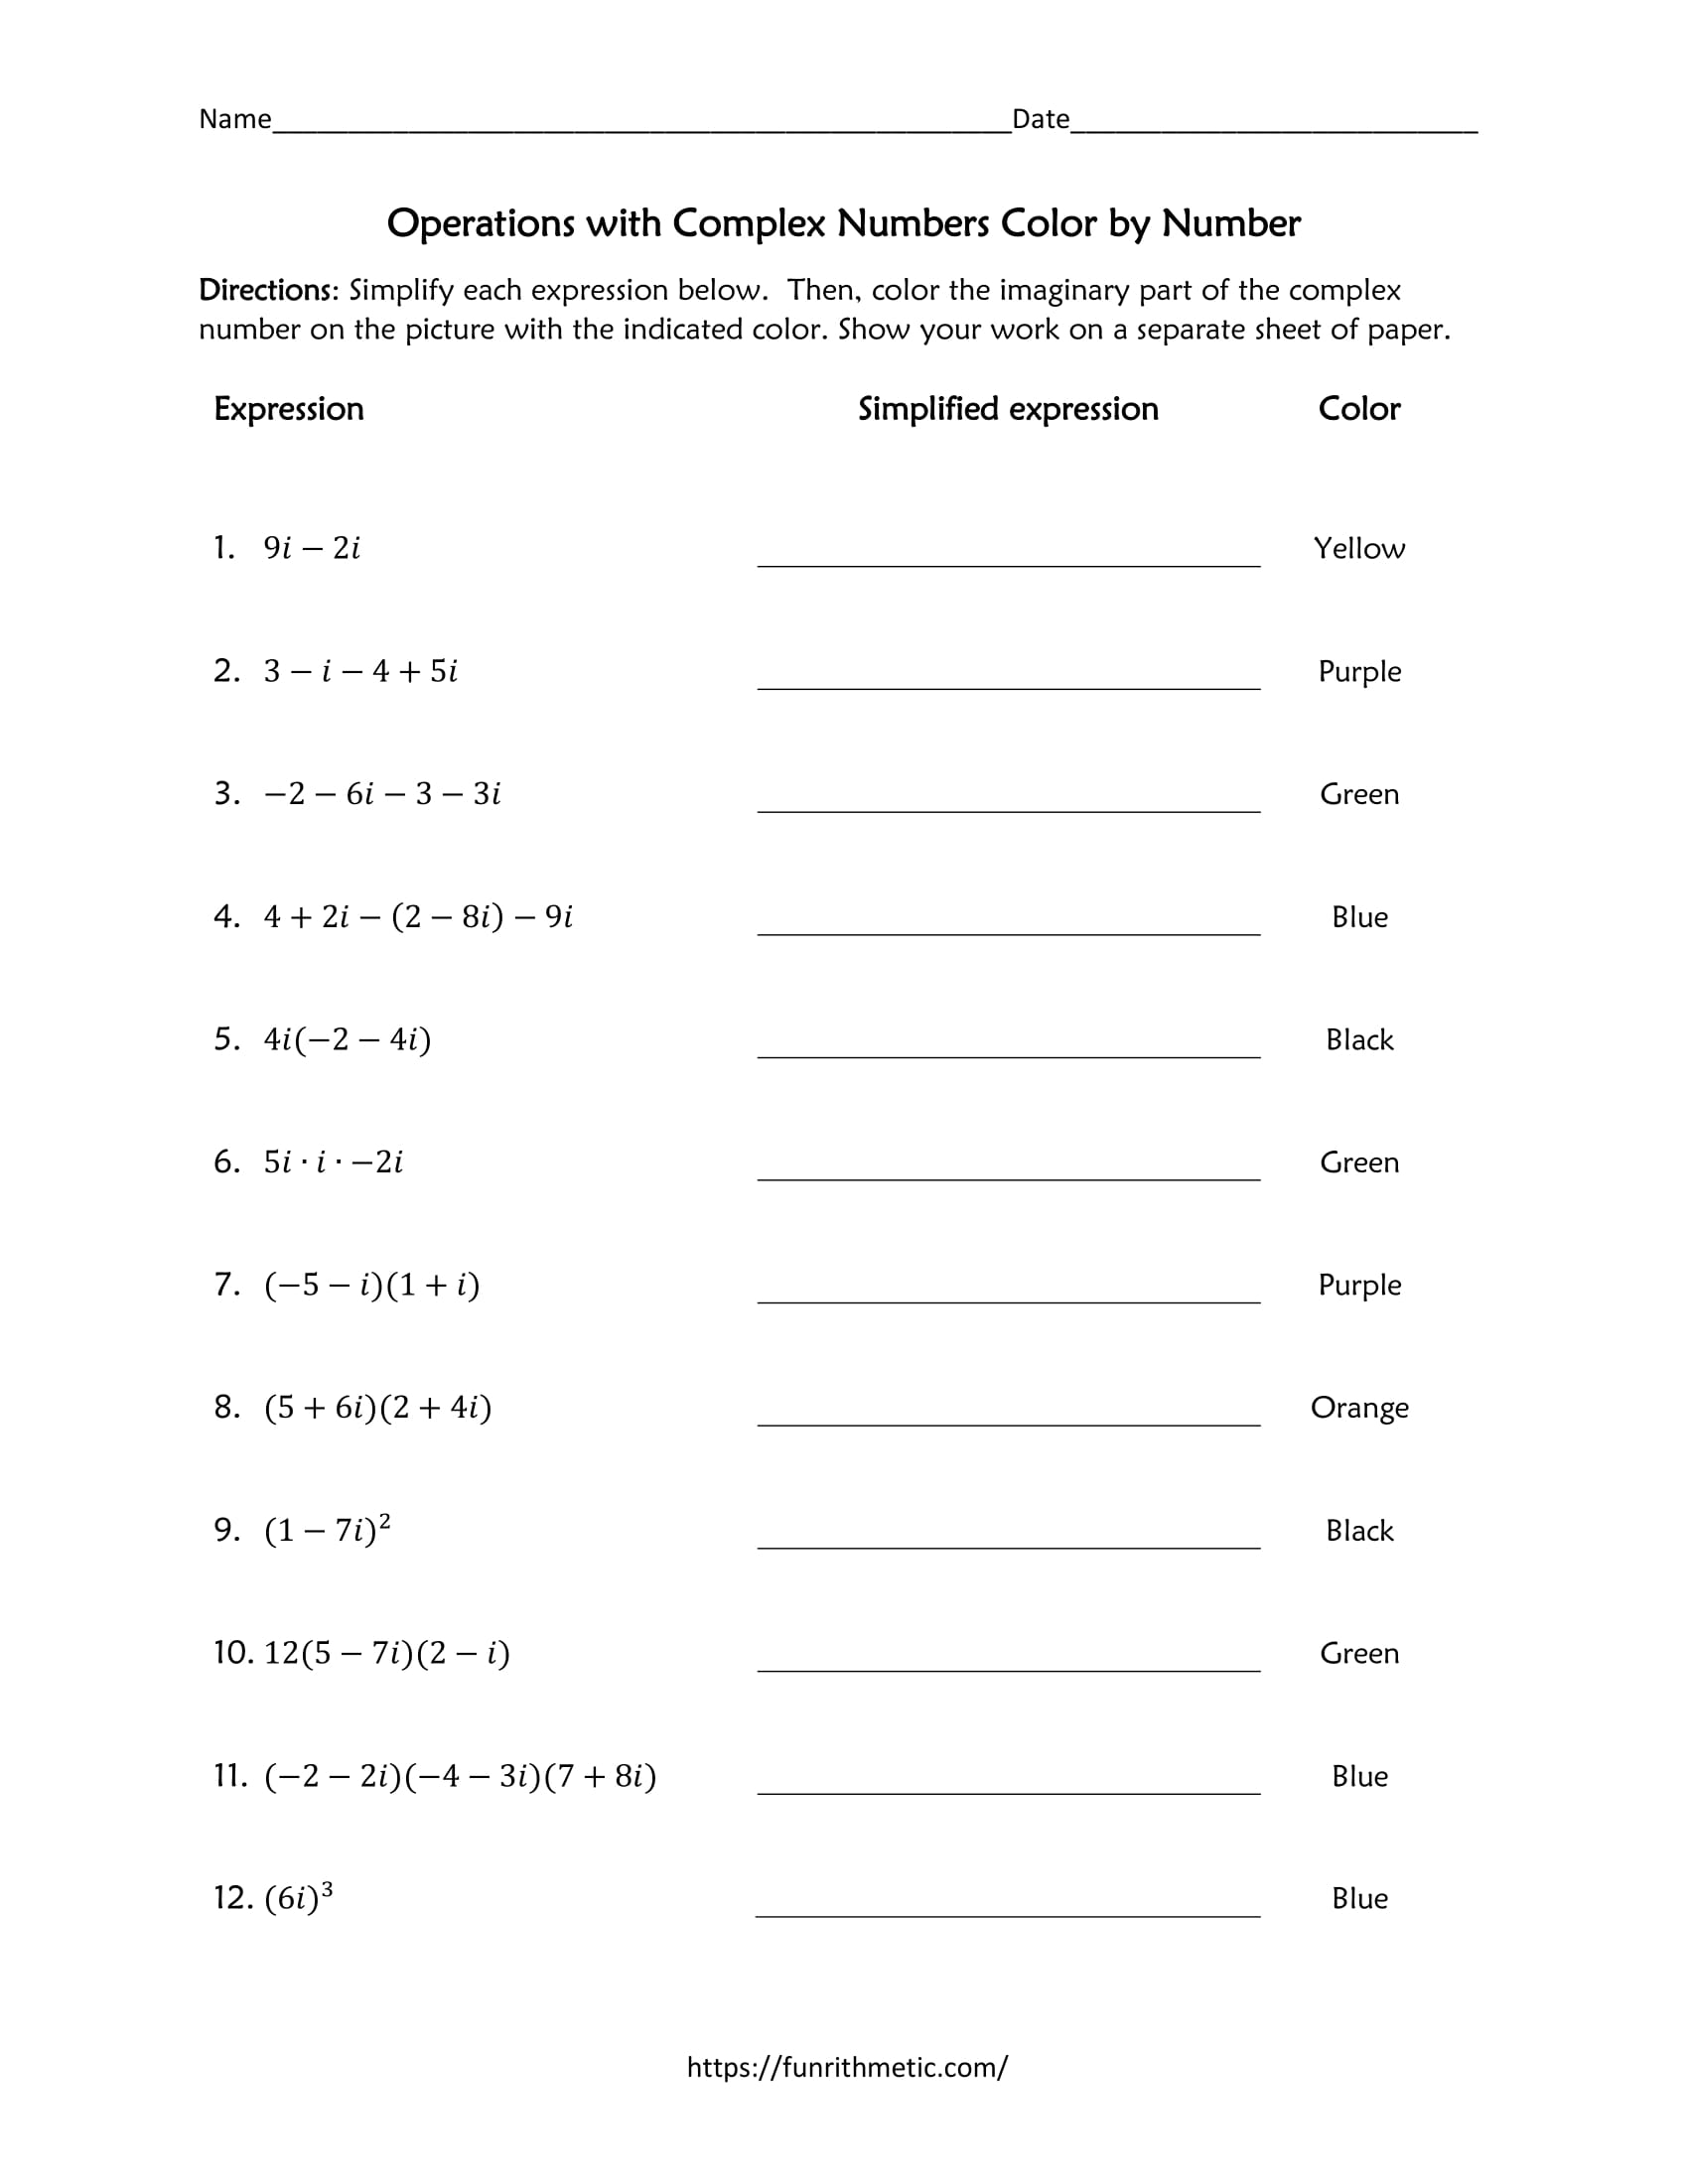 Operations with Complex Numbers Color by Number Within Complex Numbers Worksheet Answers